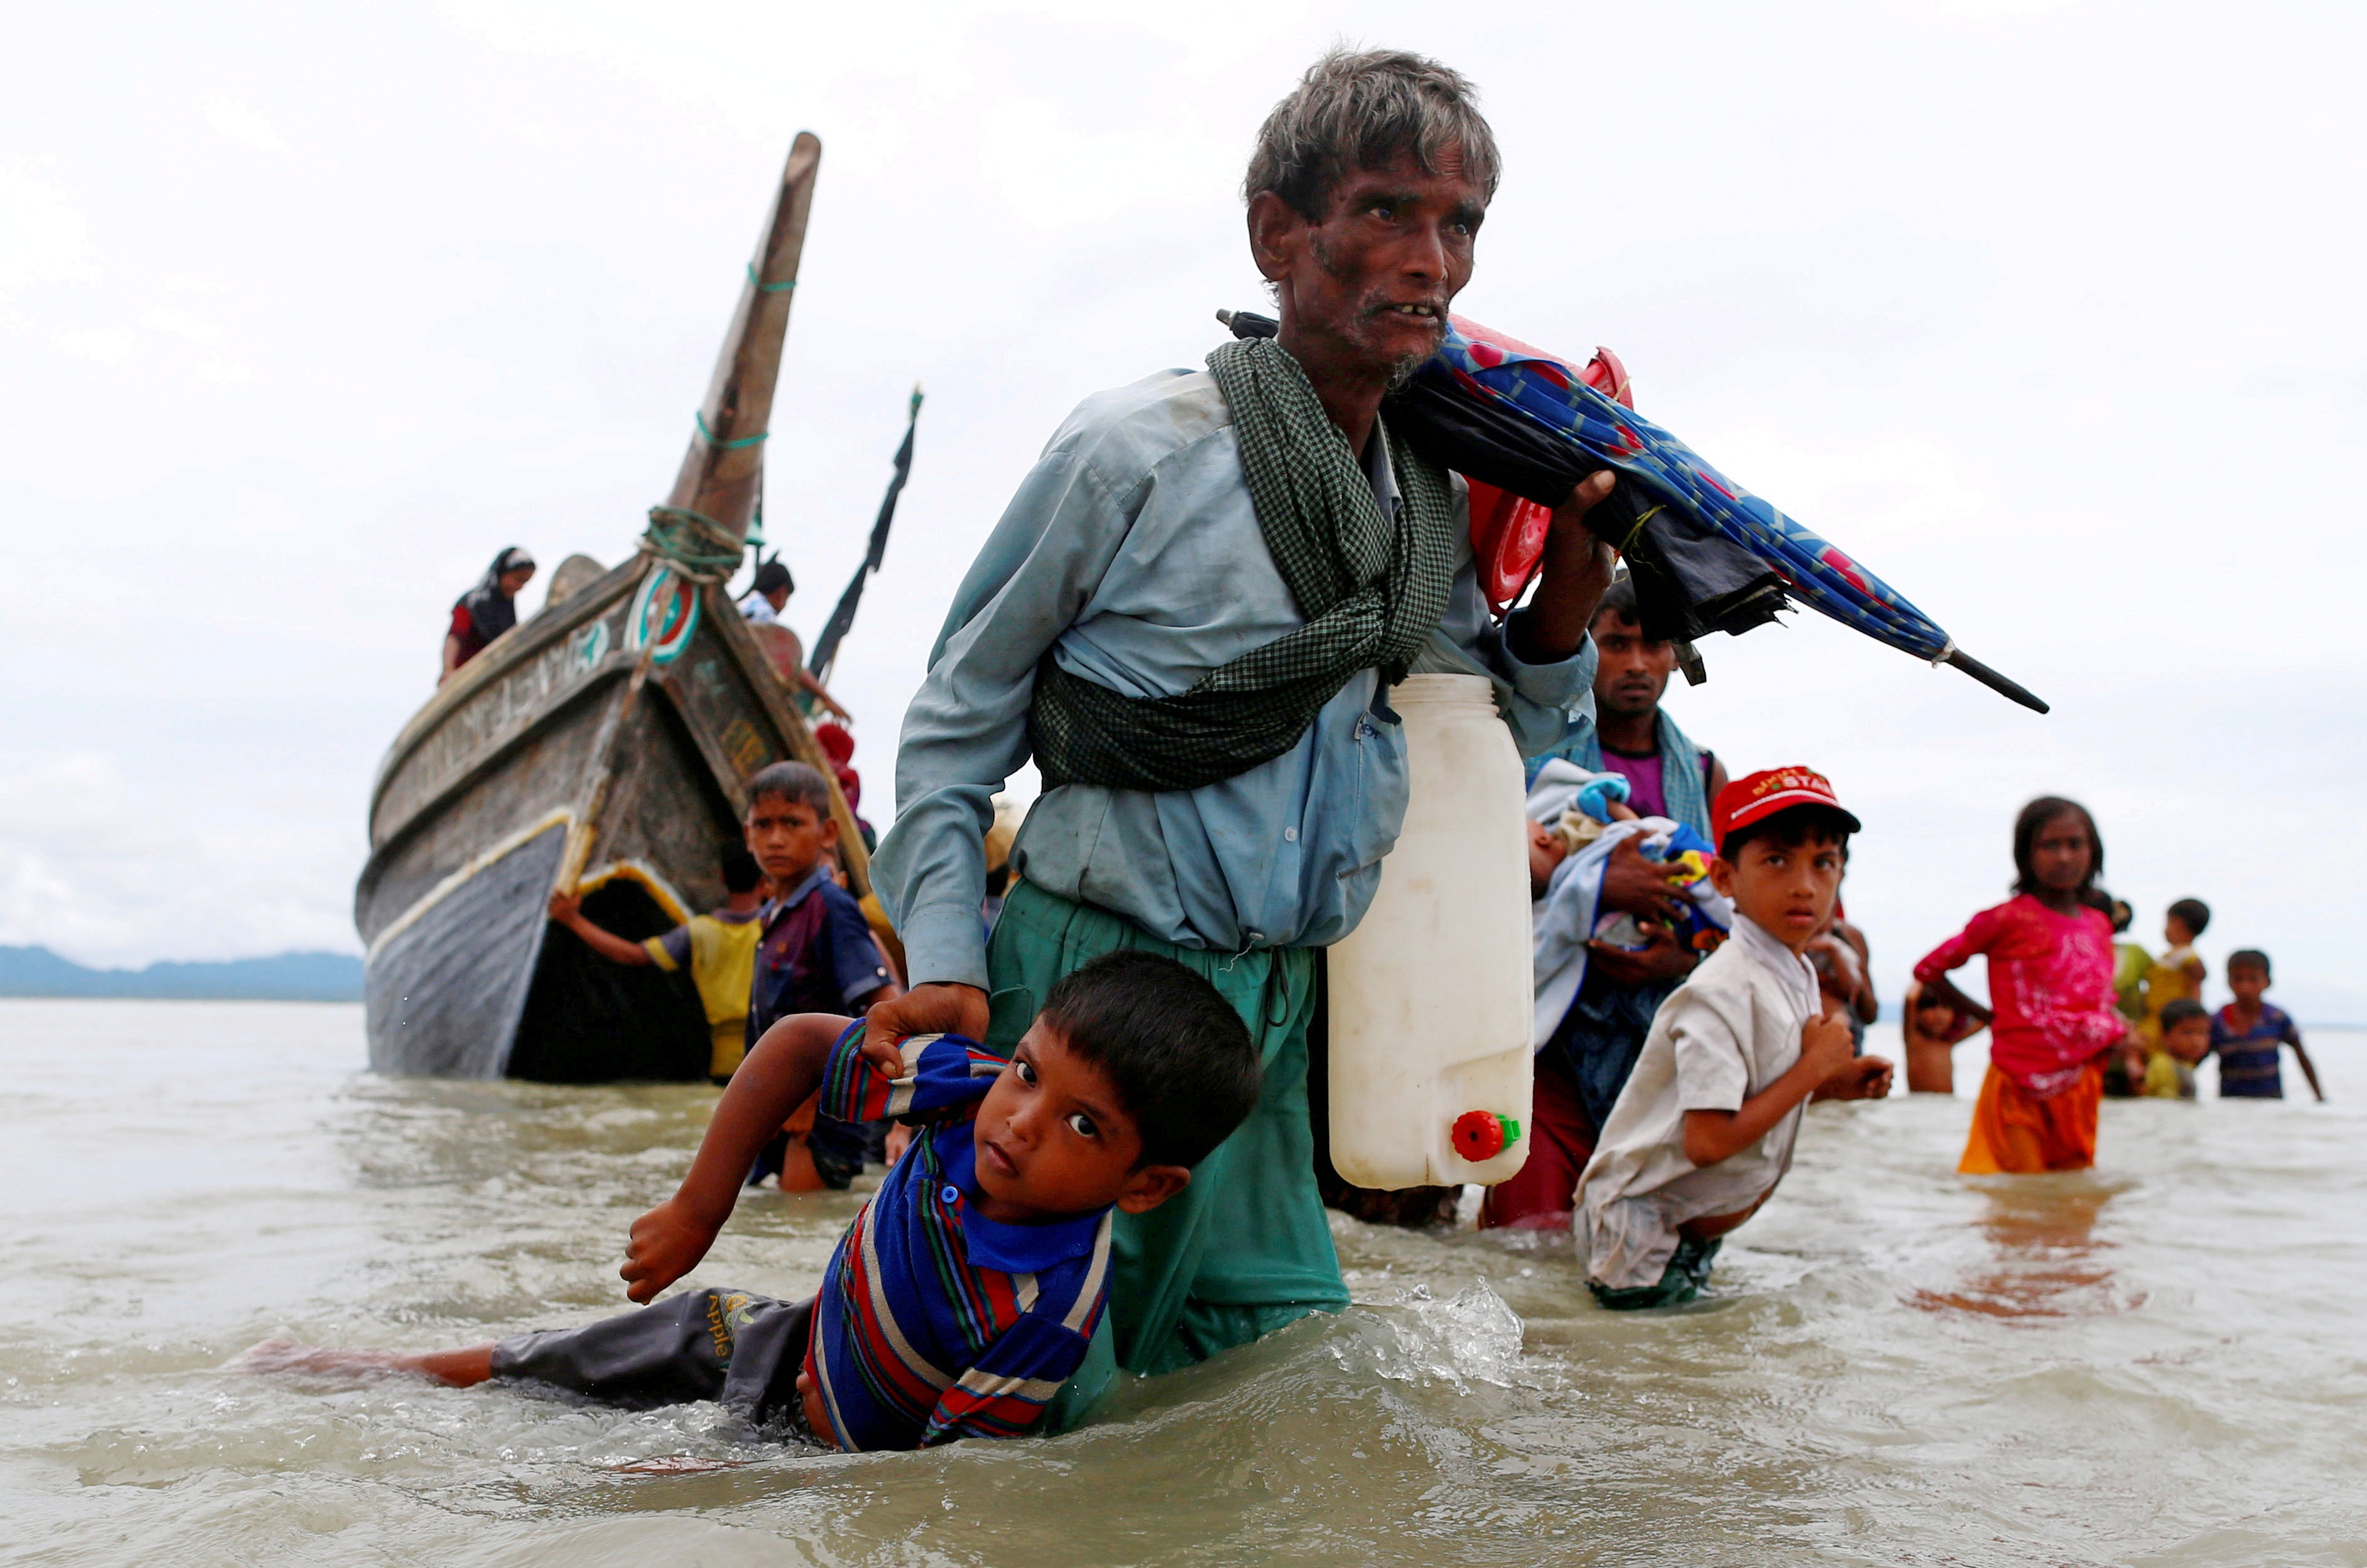 A Rohingya refugee pulls a child as they walk to the shore after crossing the Bangladesh-Myanmar border by boat through the Bay of Bengal in Shah Porir Dwip in 2017